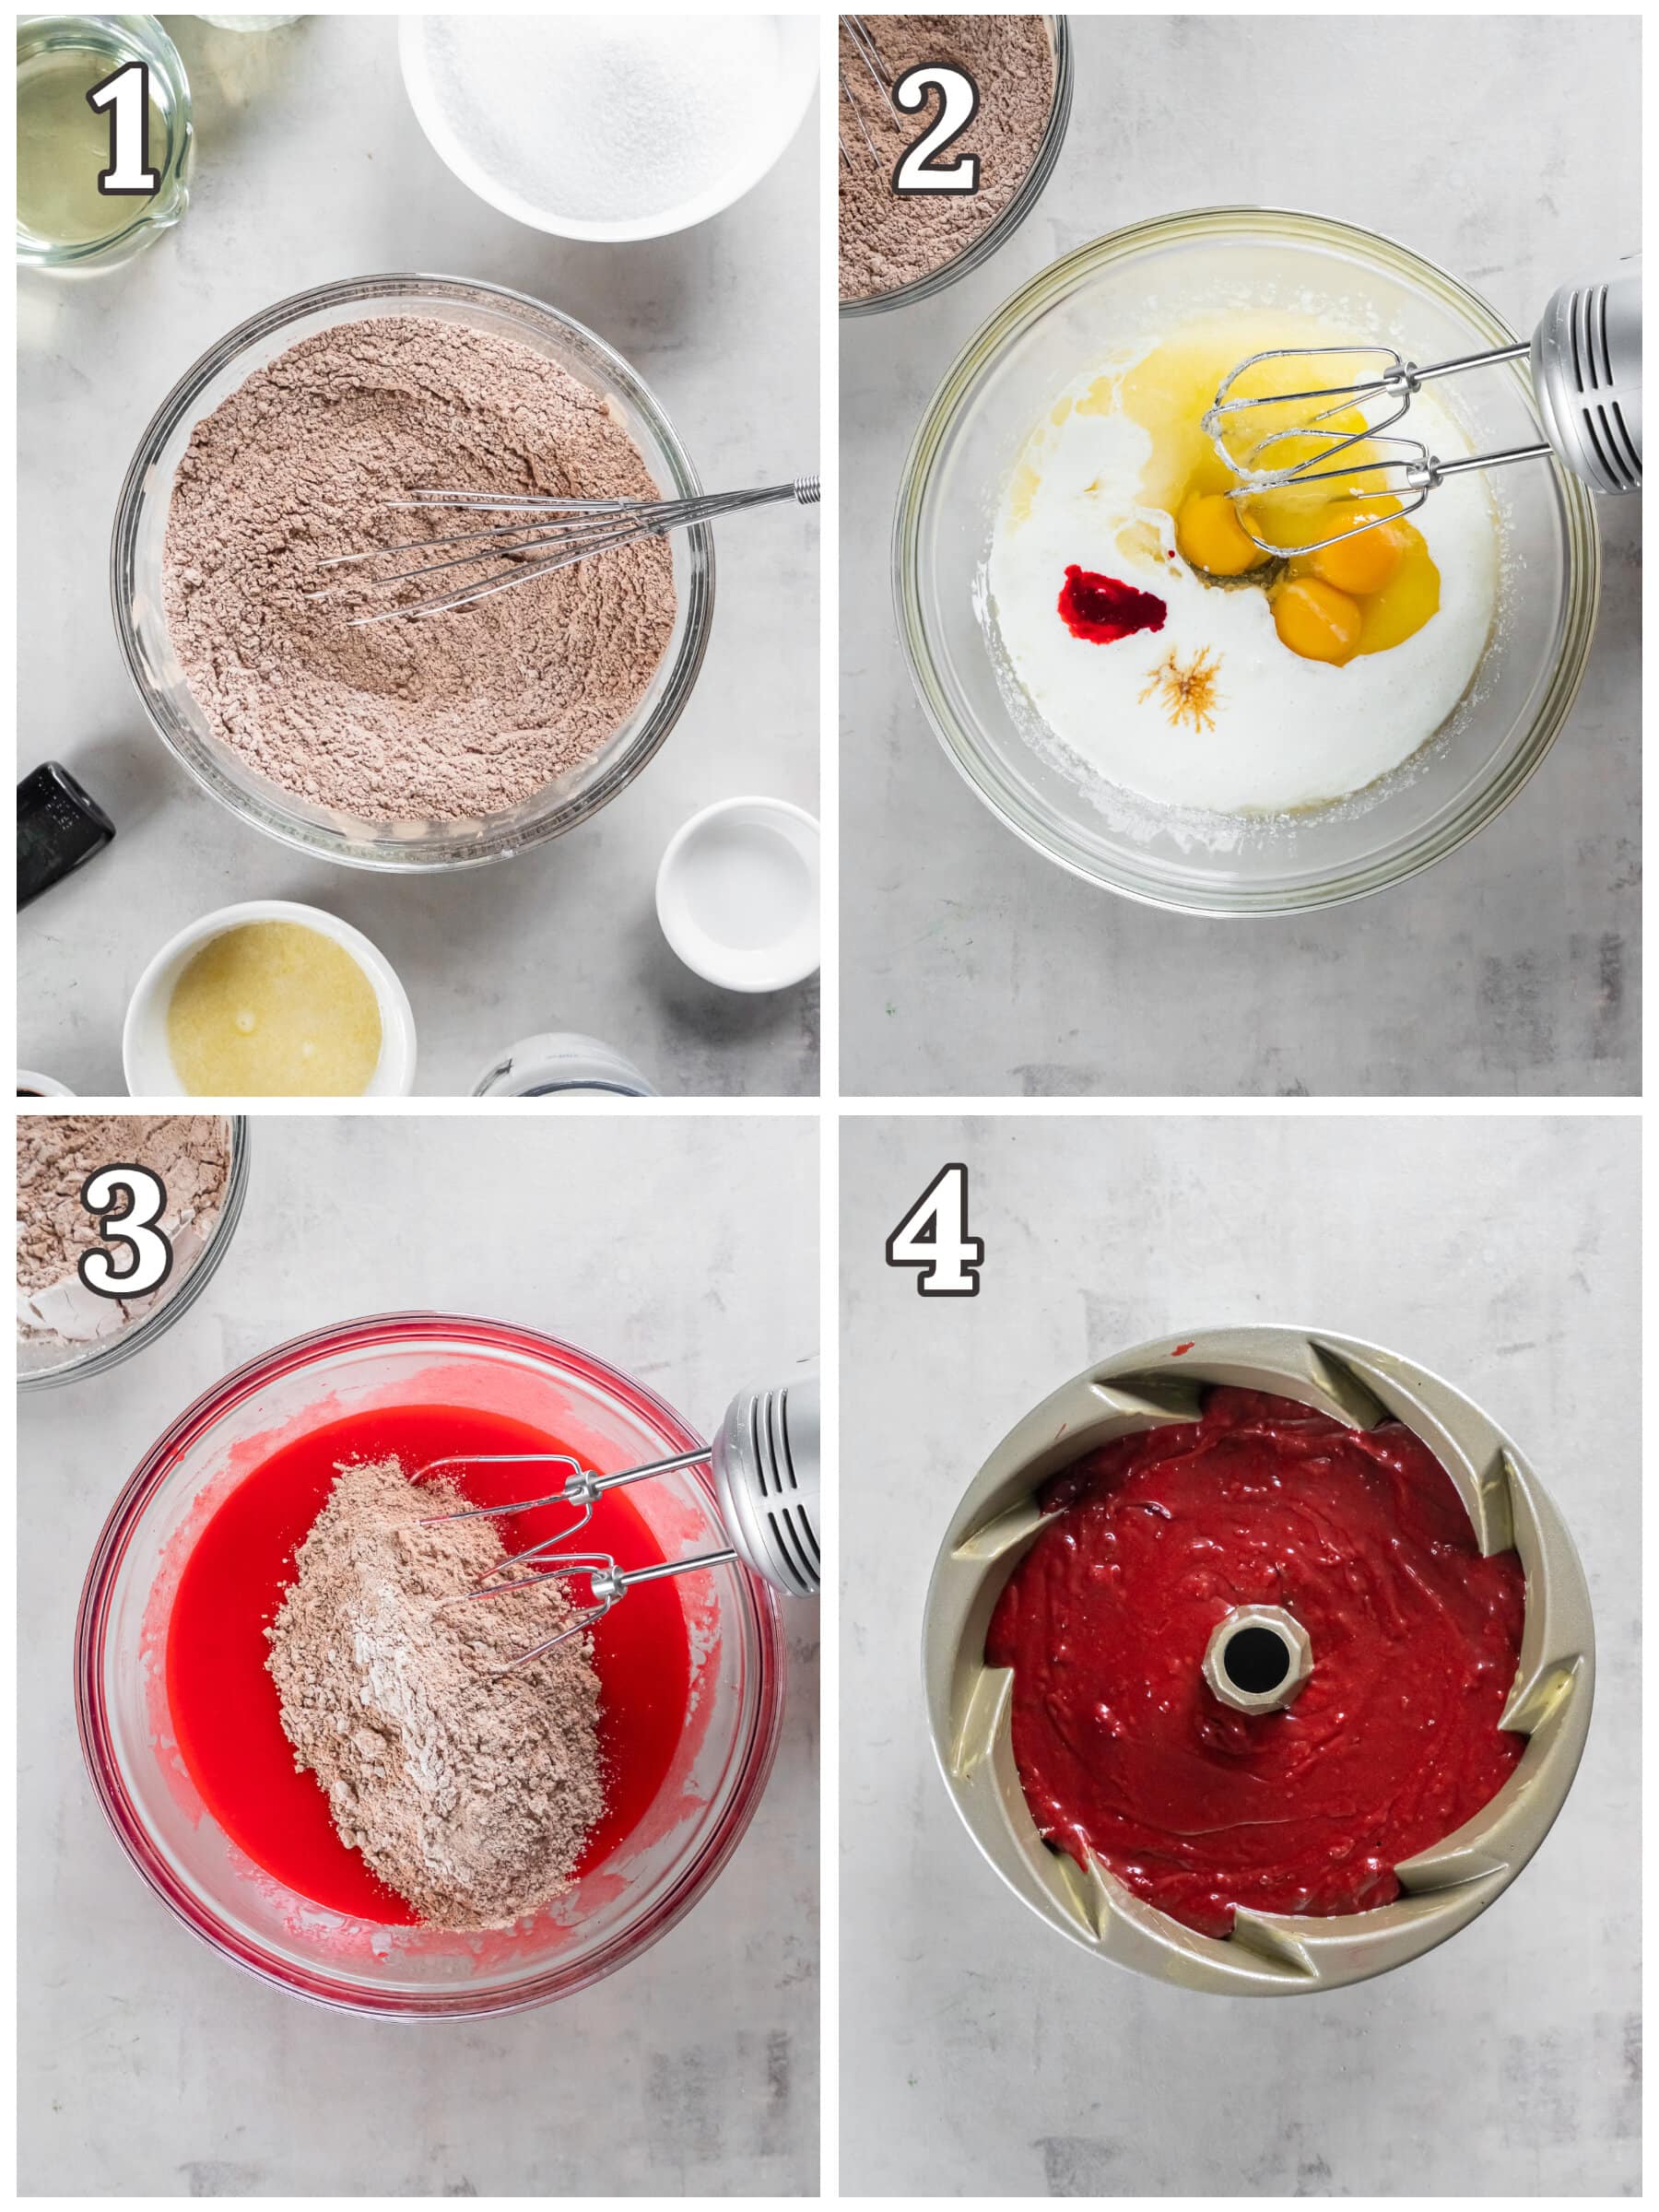 photo collage demonstrating how to make red velvet pound cake in a mixing bowl and bundt cake pan.